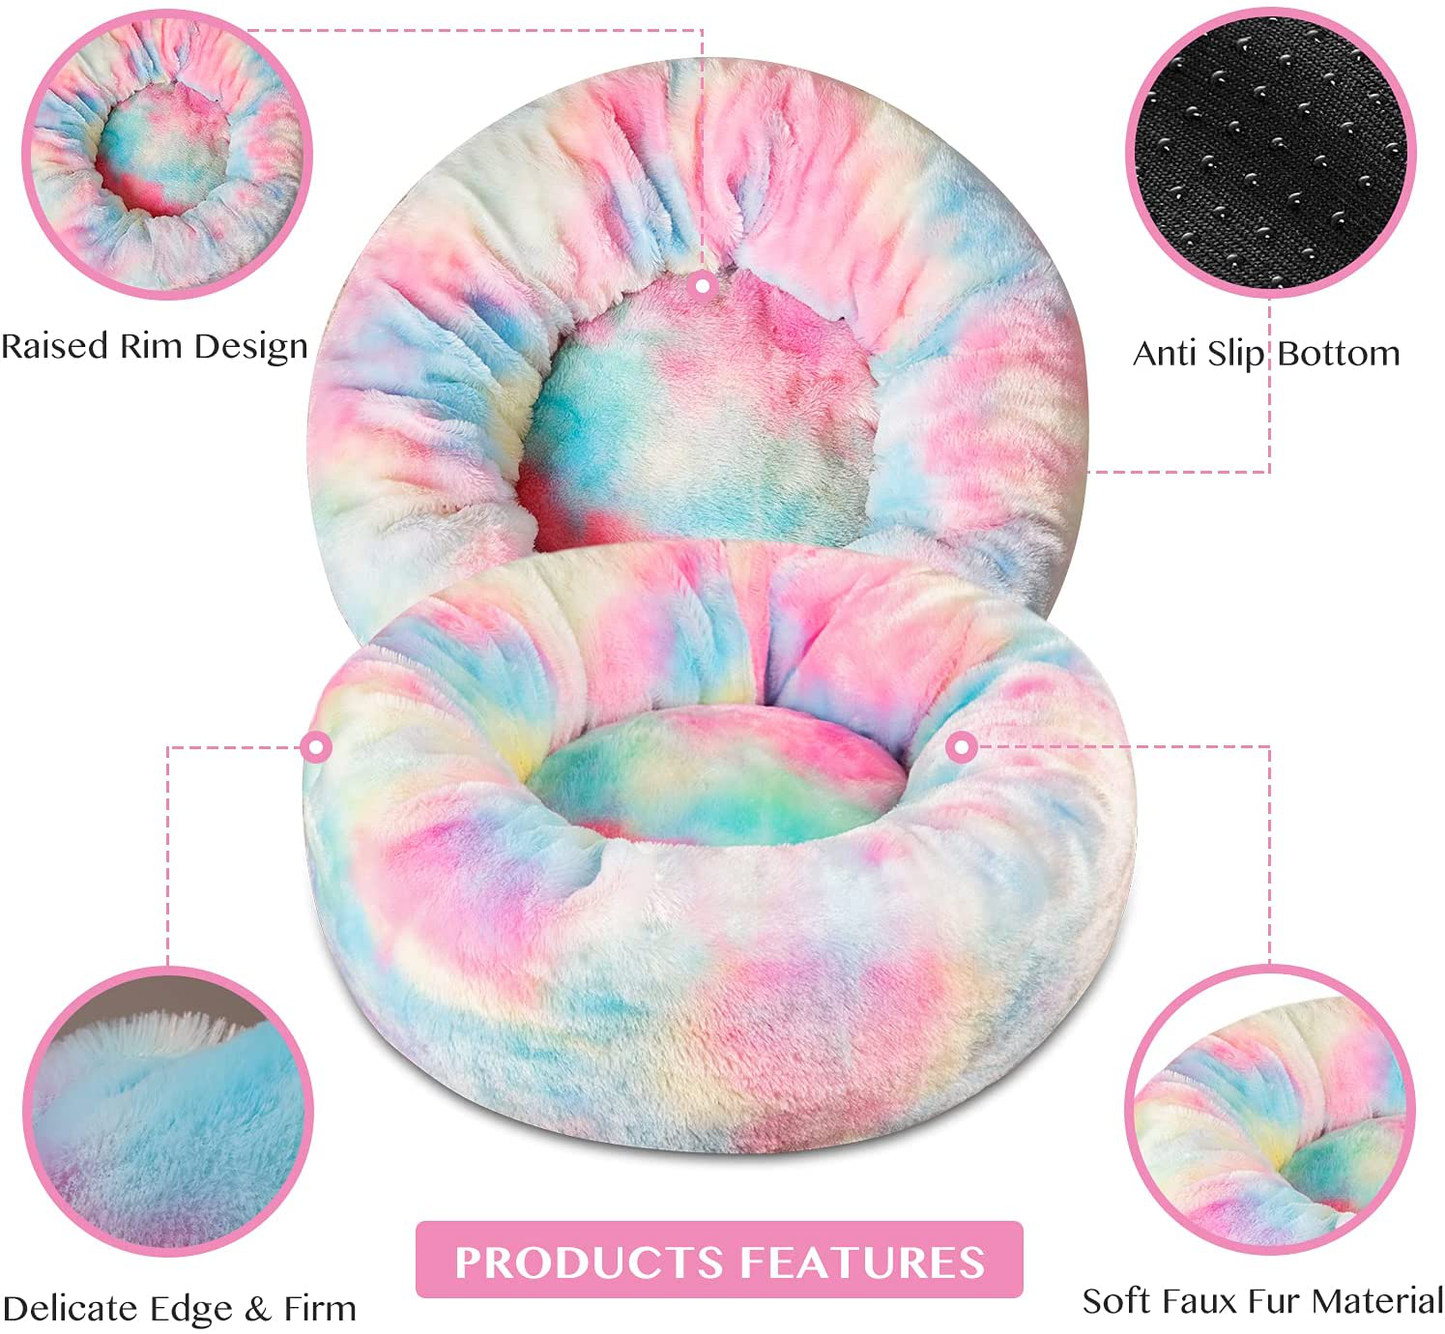 Tantivybo Donut Dog Bed & Cat Bed, Soft Faux Fur Plush Anti-Anxiety Pet Calming Bed, Washable Dog Cuddler Bed for Small Dogs Cats up to 25 Pounds ( 24'' X 24', Rainbow )